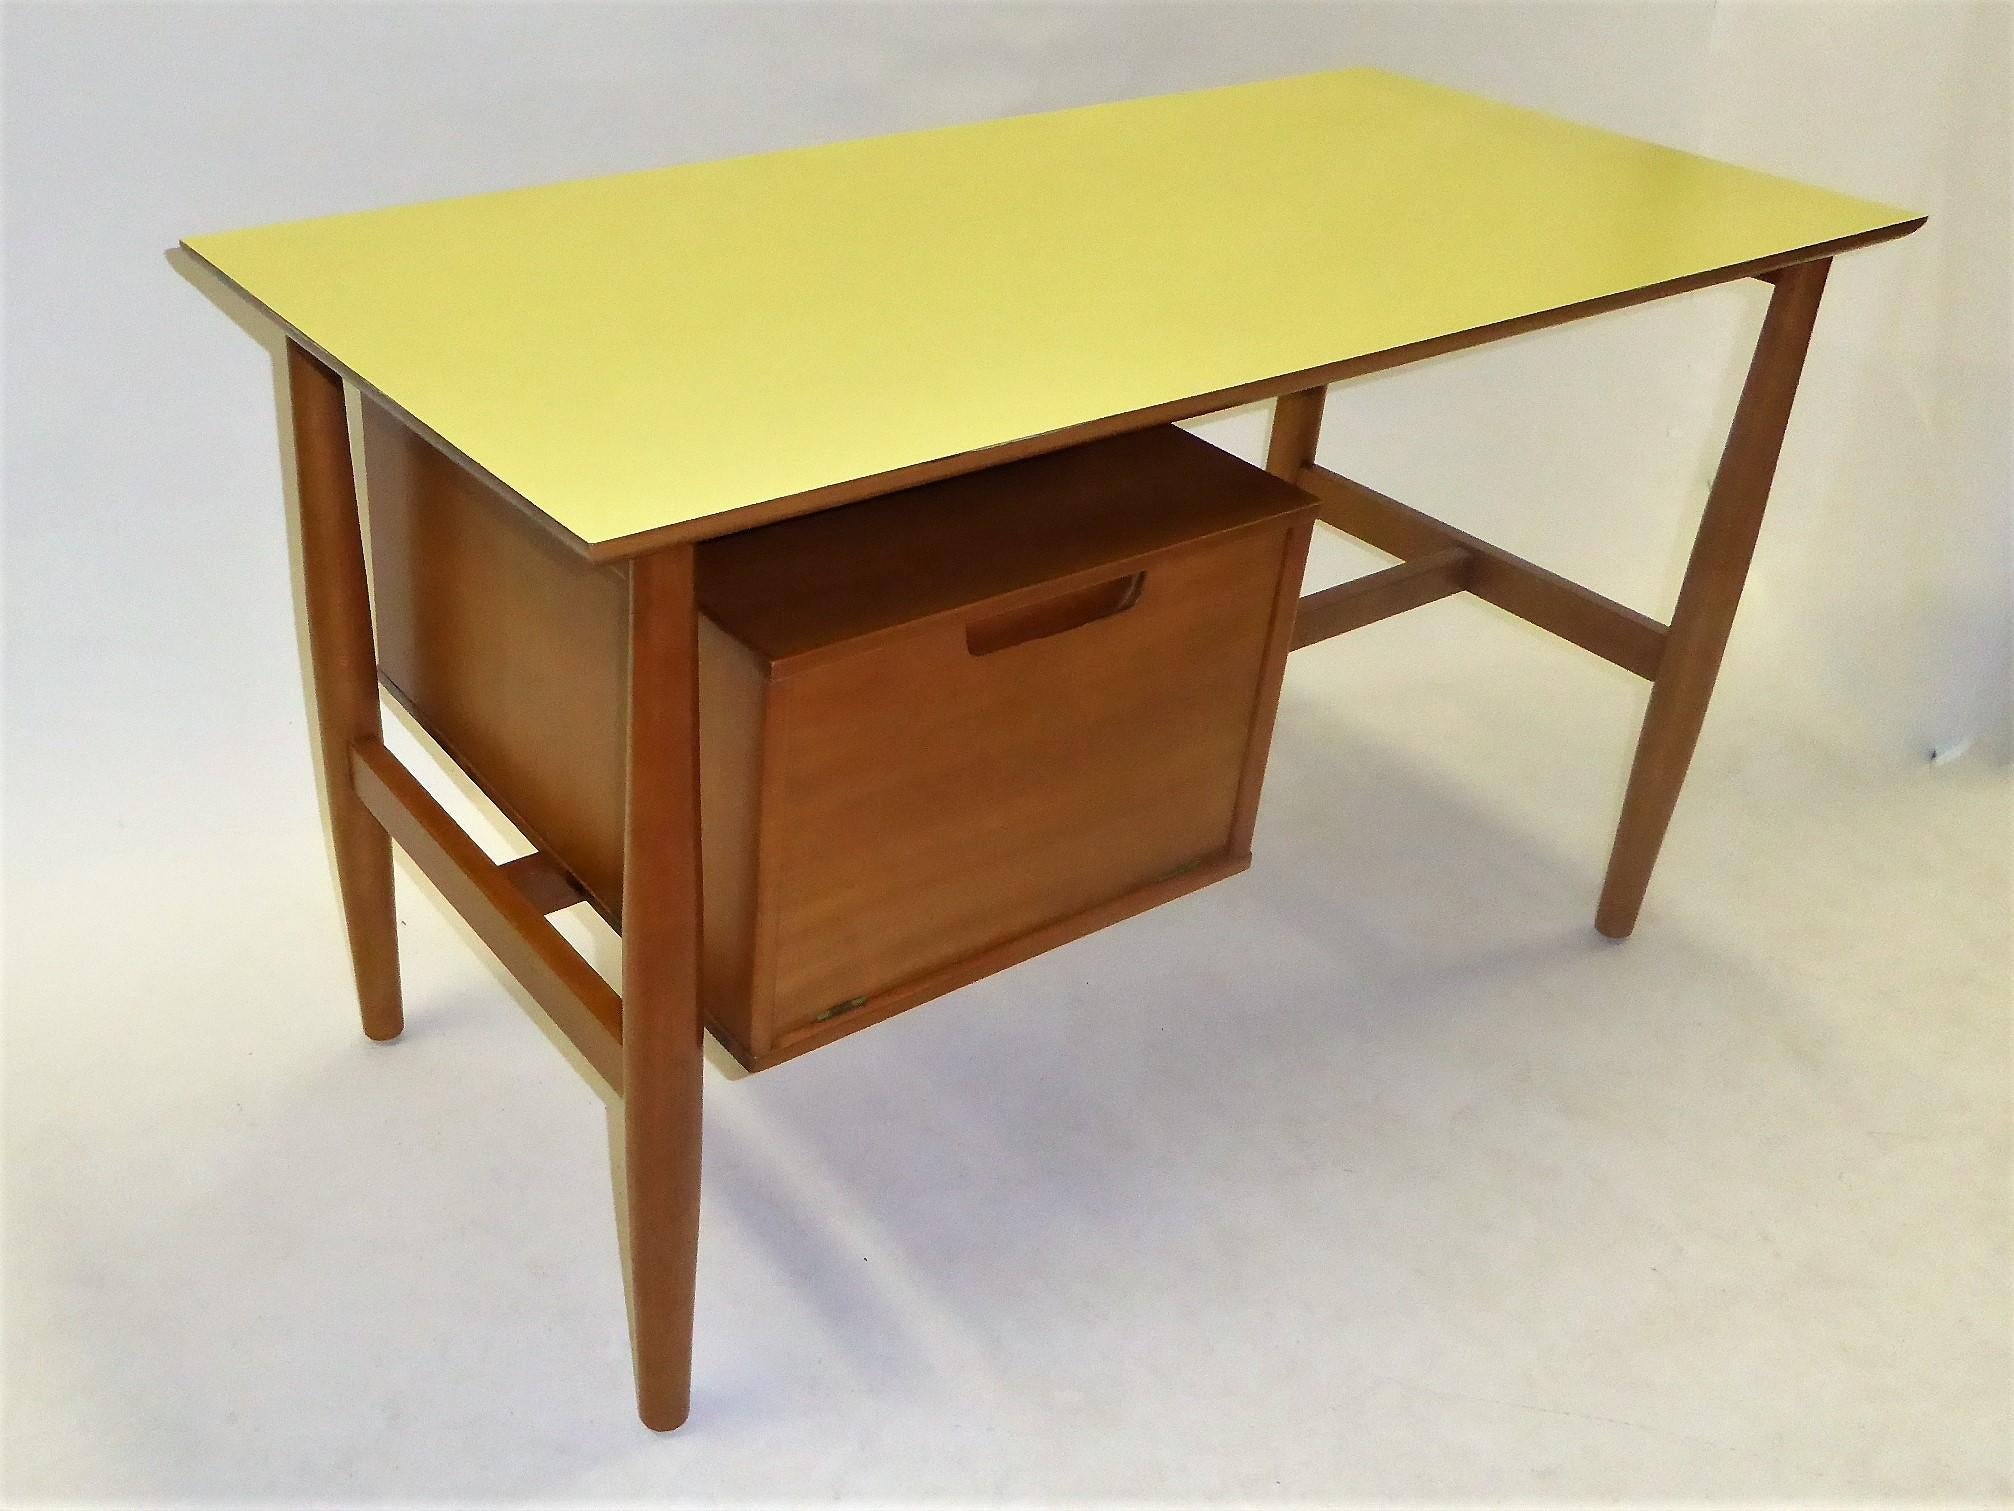 Beautiful blond elm wood Milo Baughman for Drexel Writers Desk from the 